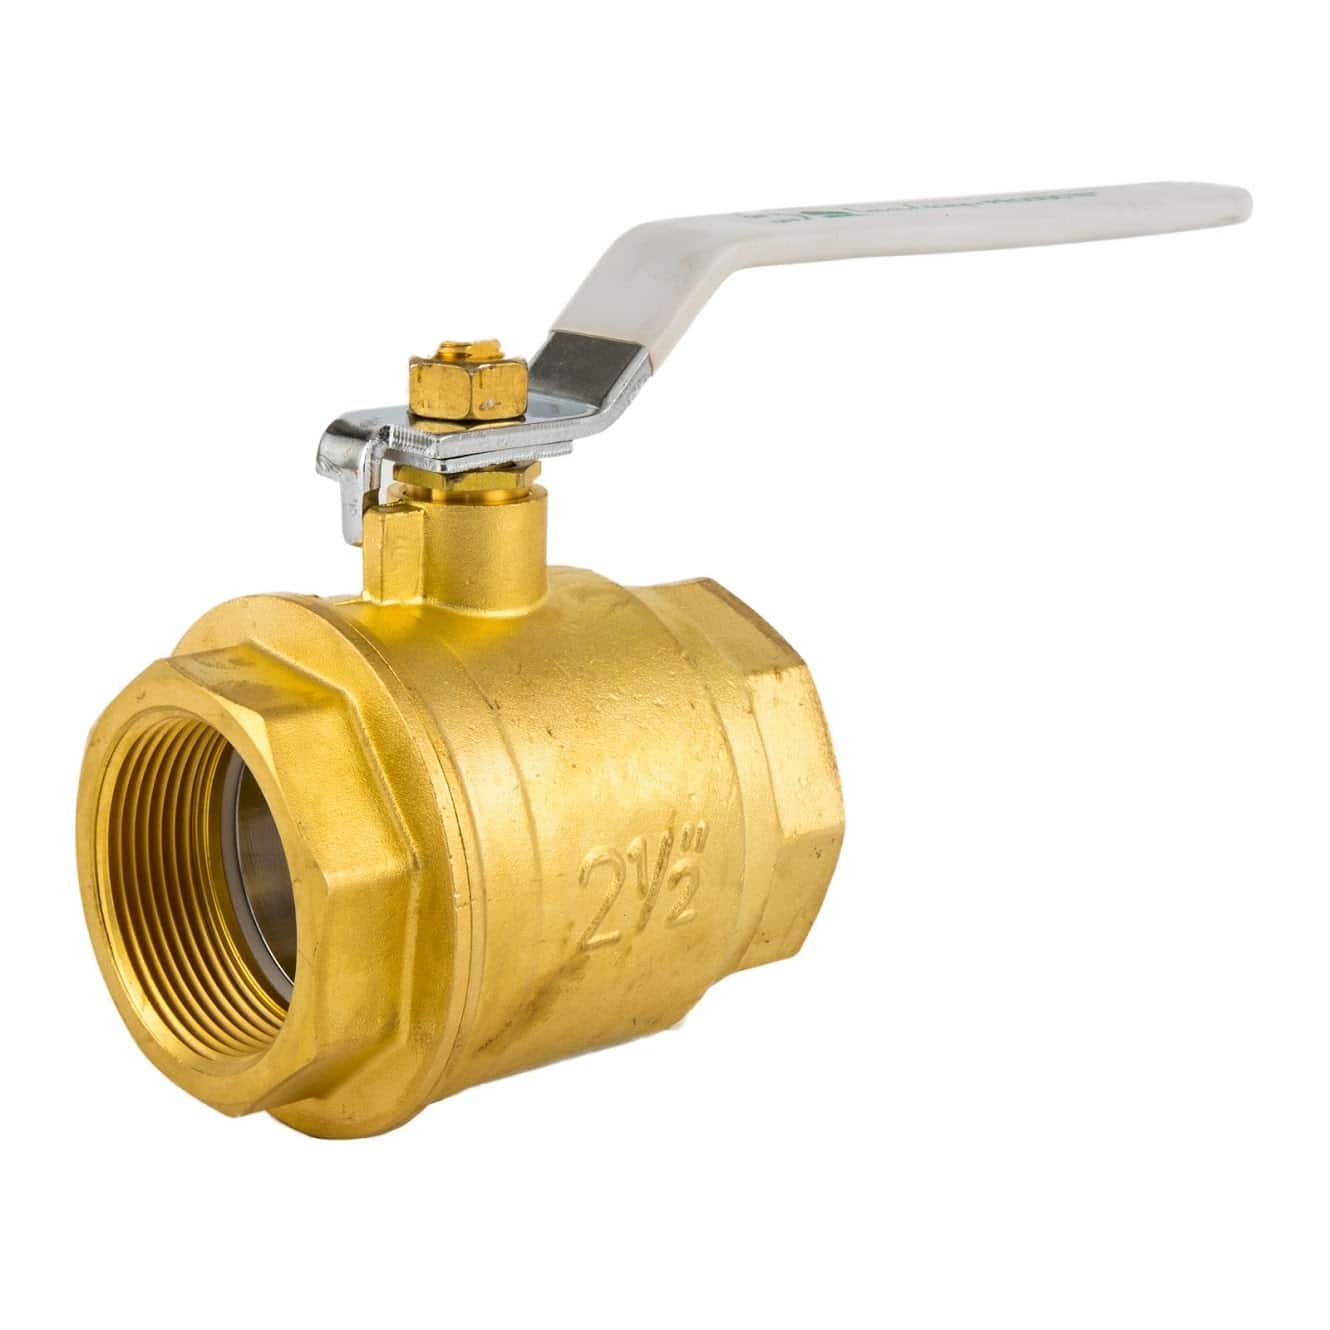 2 1/2-inch Full Port Brass Ball Valve - Landscape Products Inc.